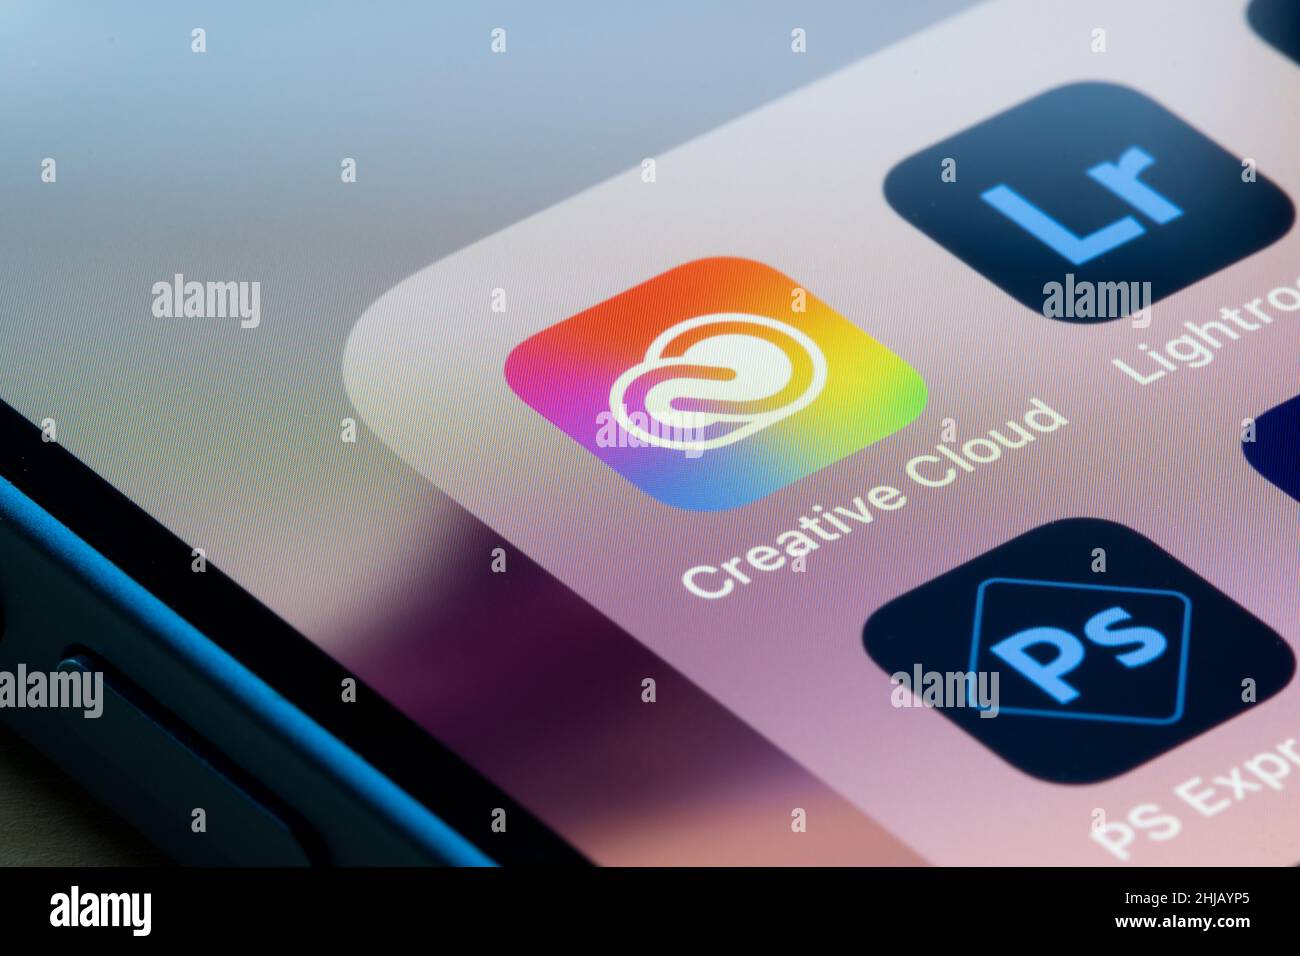 Adobe Creative Cloud, Lightroom and PS Express apps are seen on an iPhone. Adobe Creative Cloud is a set of applications and services from Adobe Inc. Stock Photo